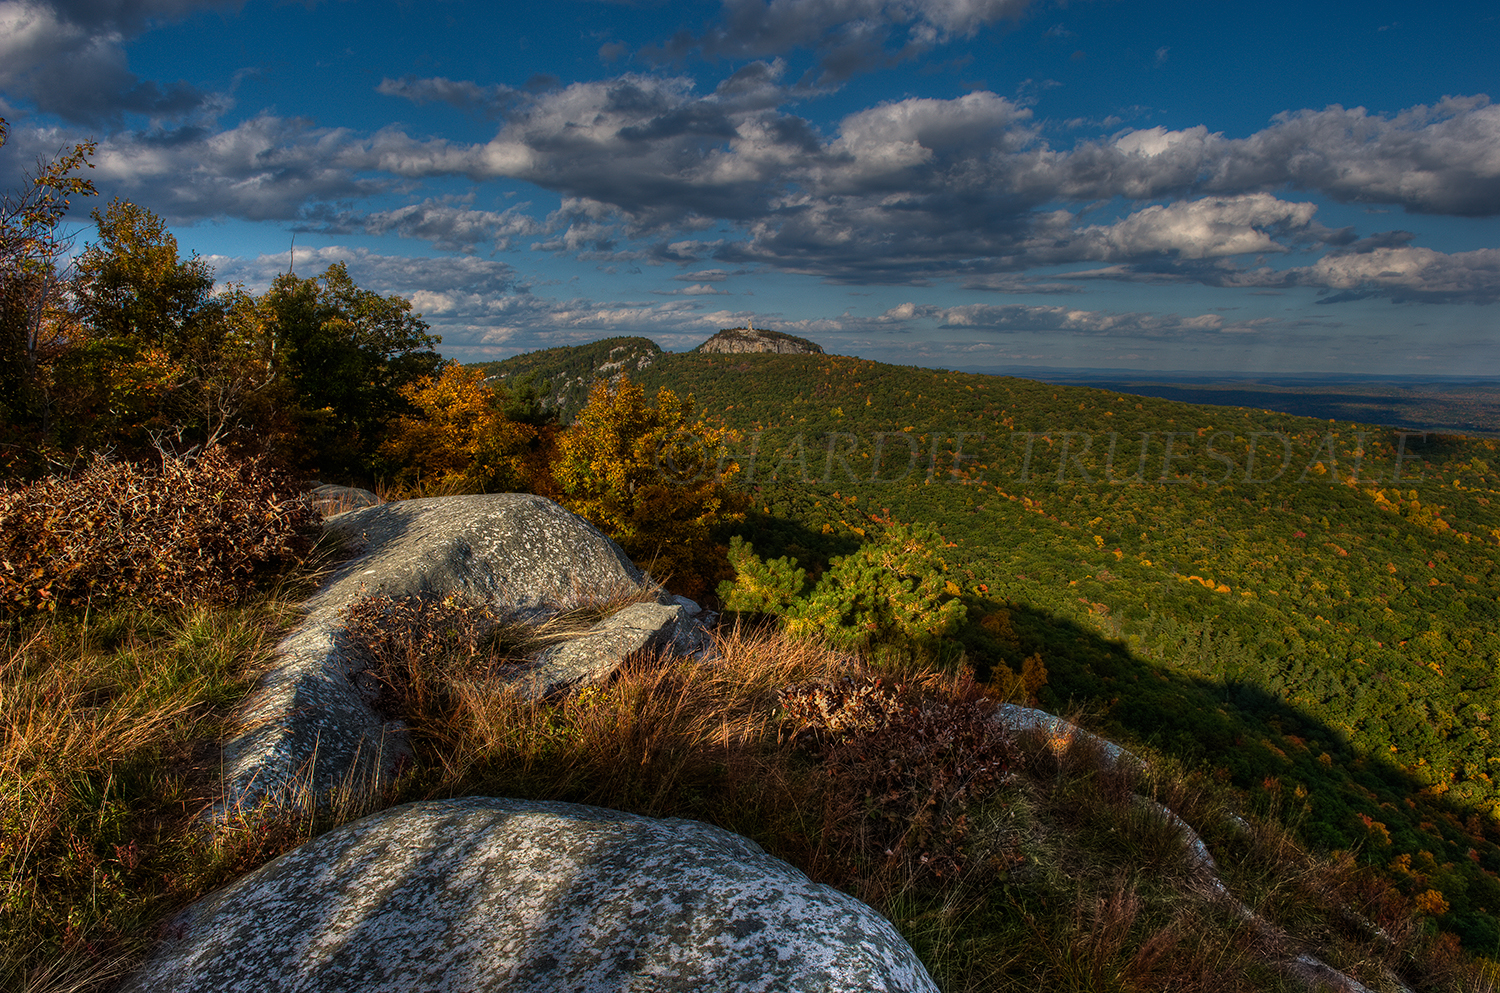  Gks#806 "Skytop From Trapps, Mohonk Preserve" 